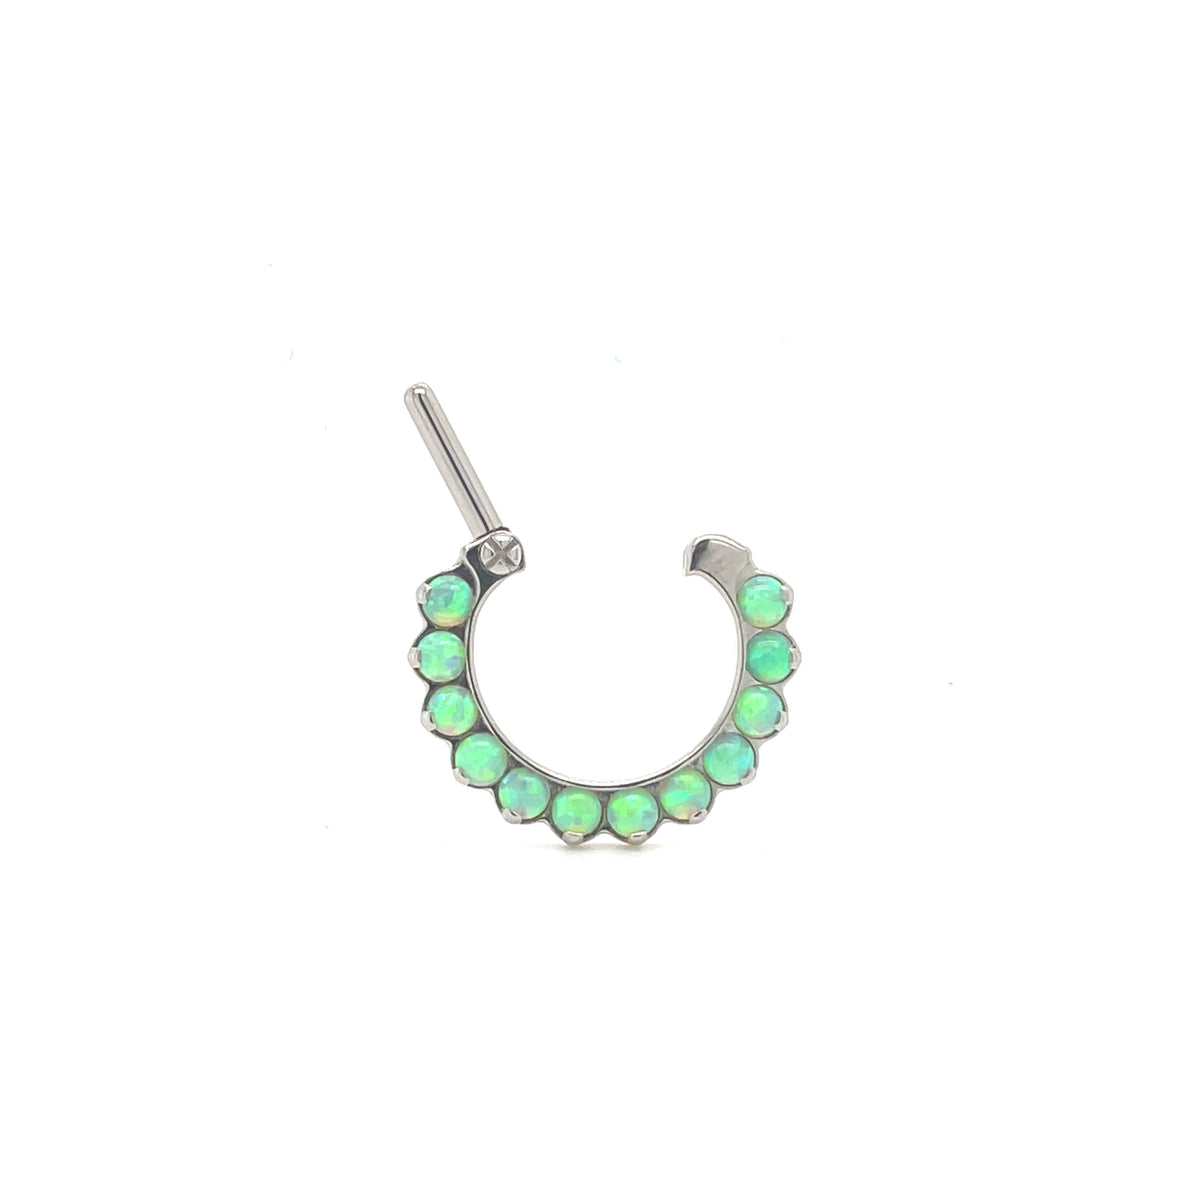 Industrial Strength Odyssey Prong Set Lime Opal Clicker